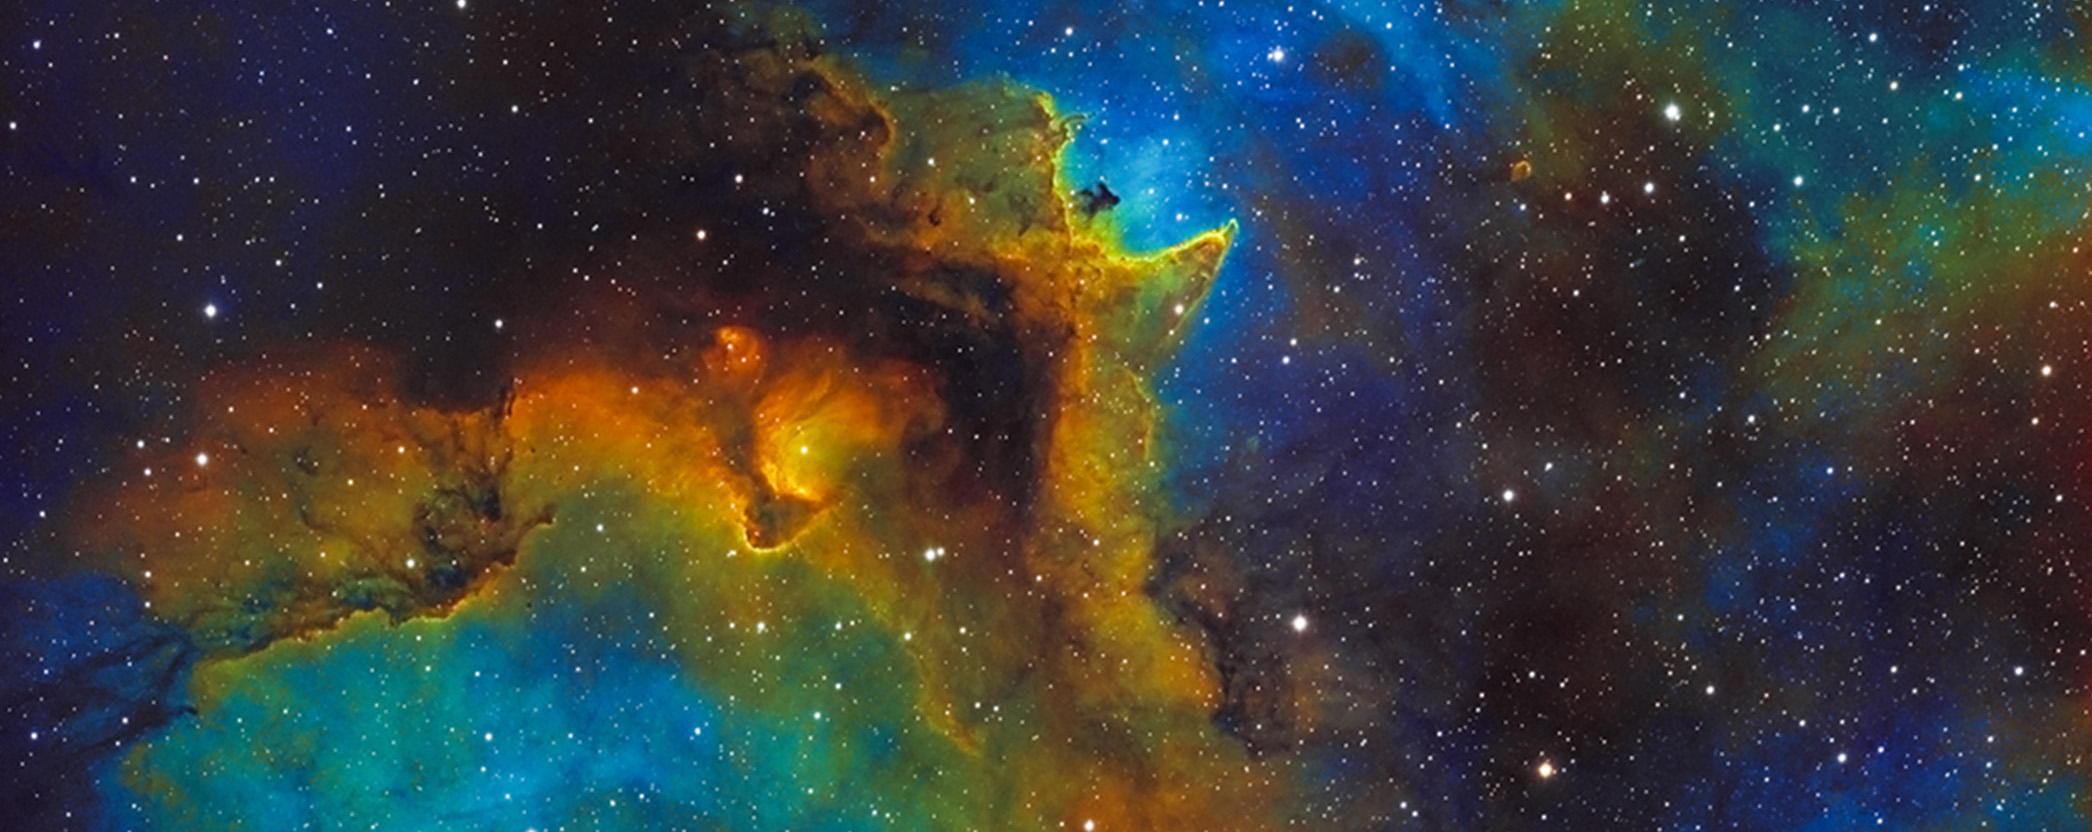 large hydrogen, sulfur and oxygen gas cloud in the constellation of Cassiopeia